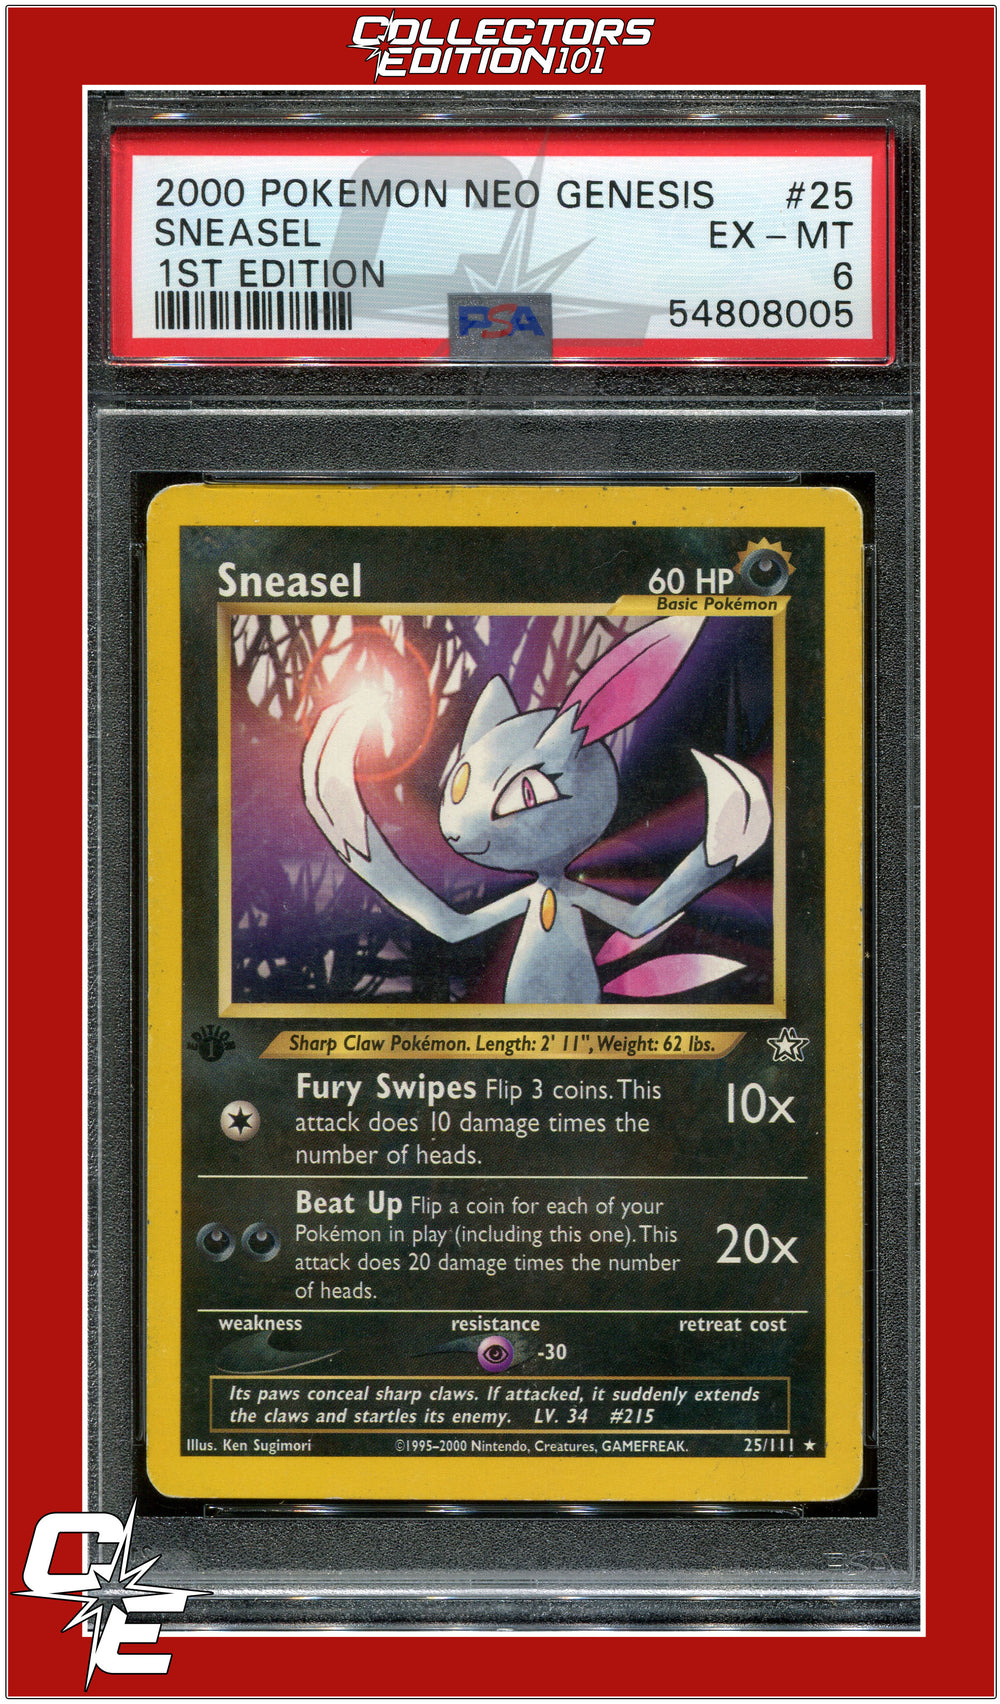 Neo Genesis 1st Edition 25 Sneasel PSA 6